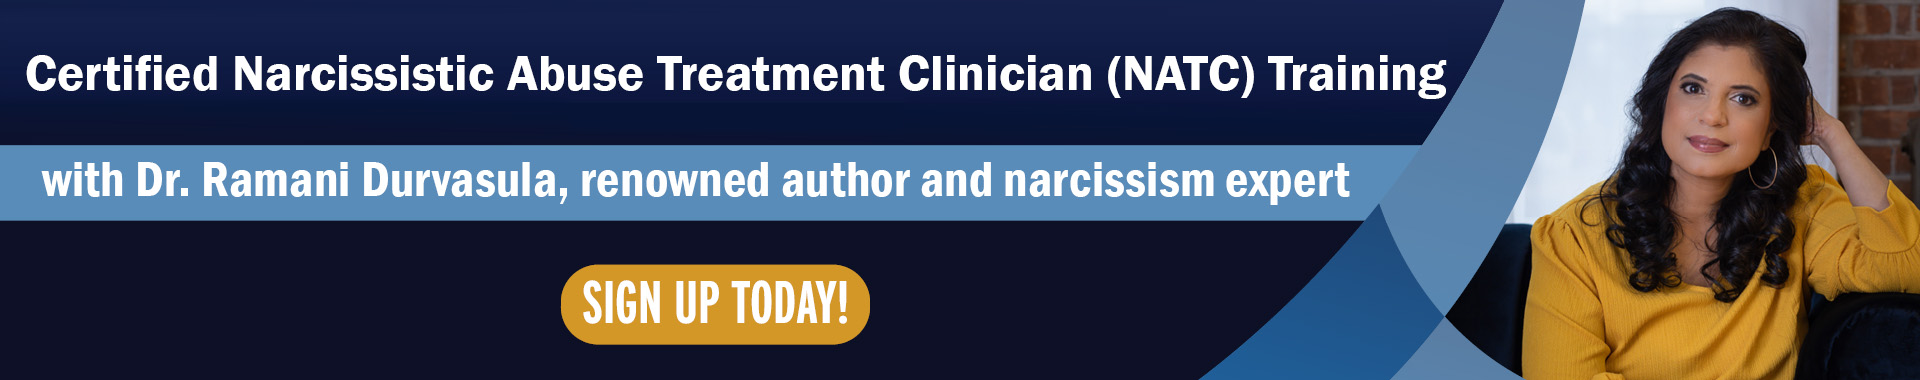 Certified Narcissistic Abuse Treatment Clinician (NATC) Training with Dr. Ramani Durvasula